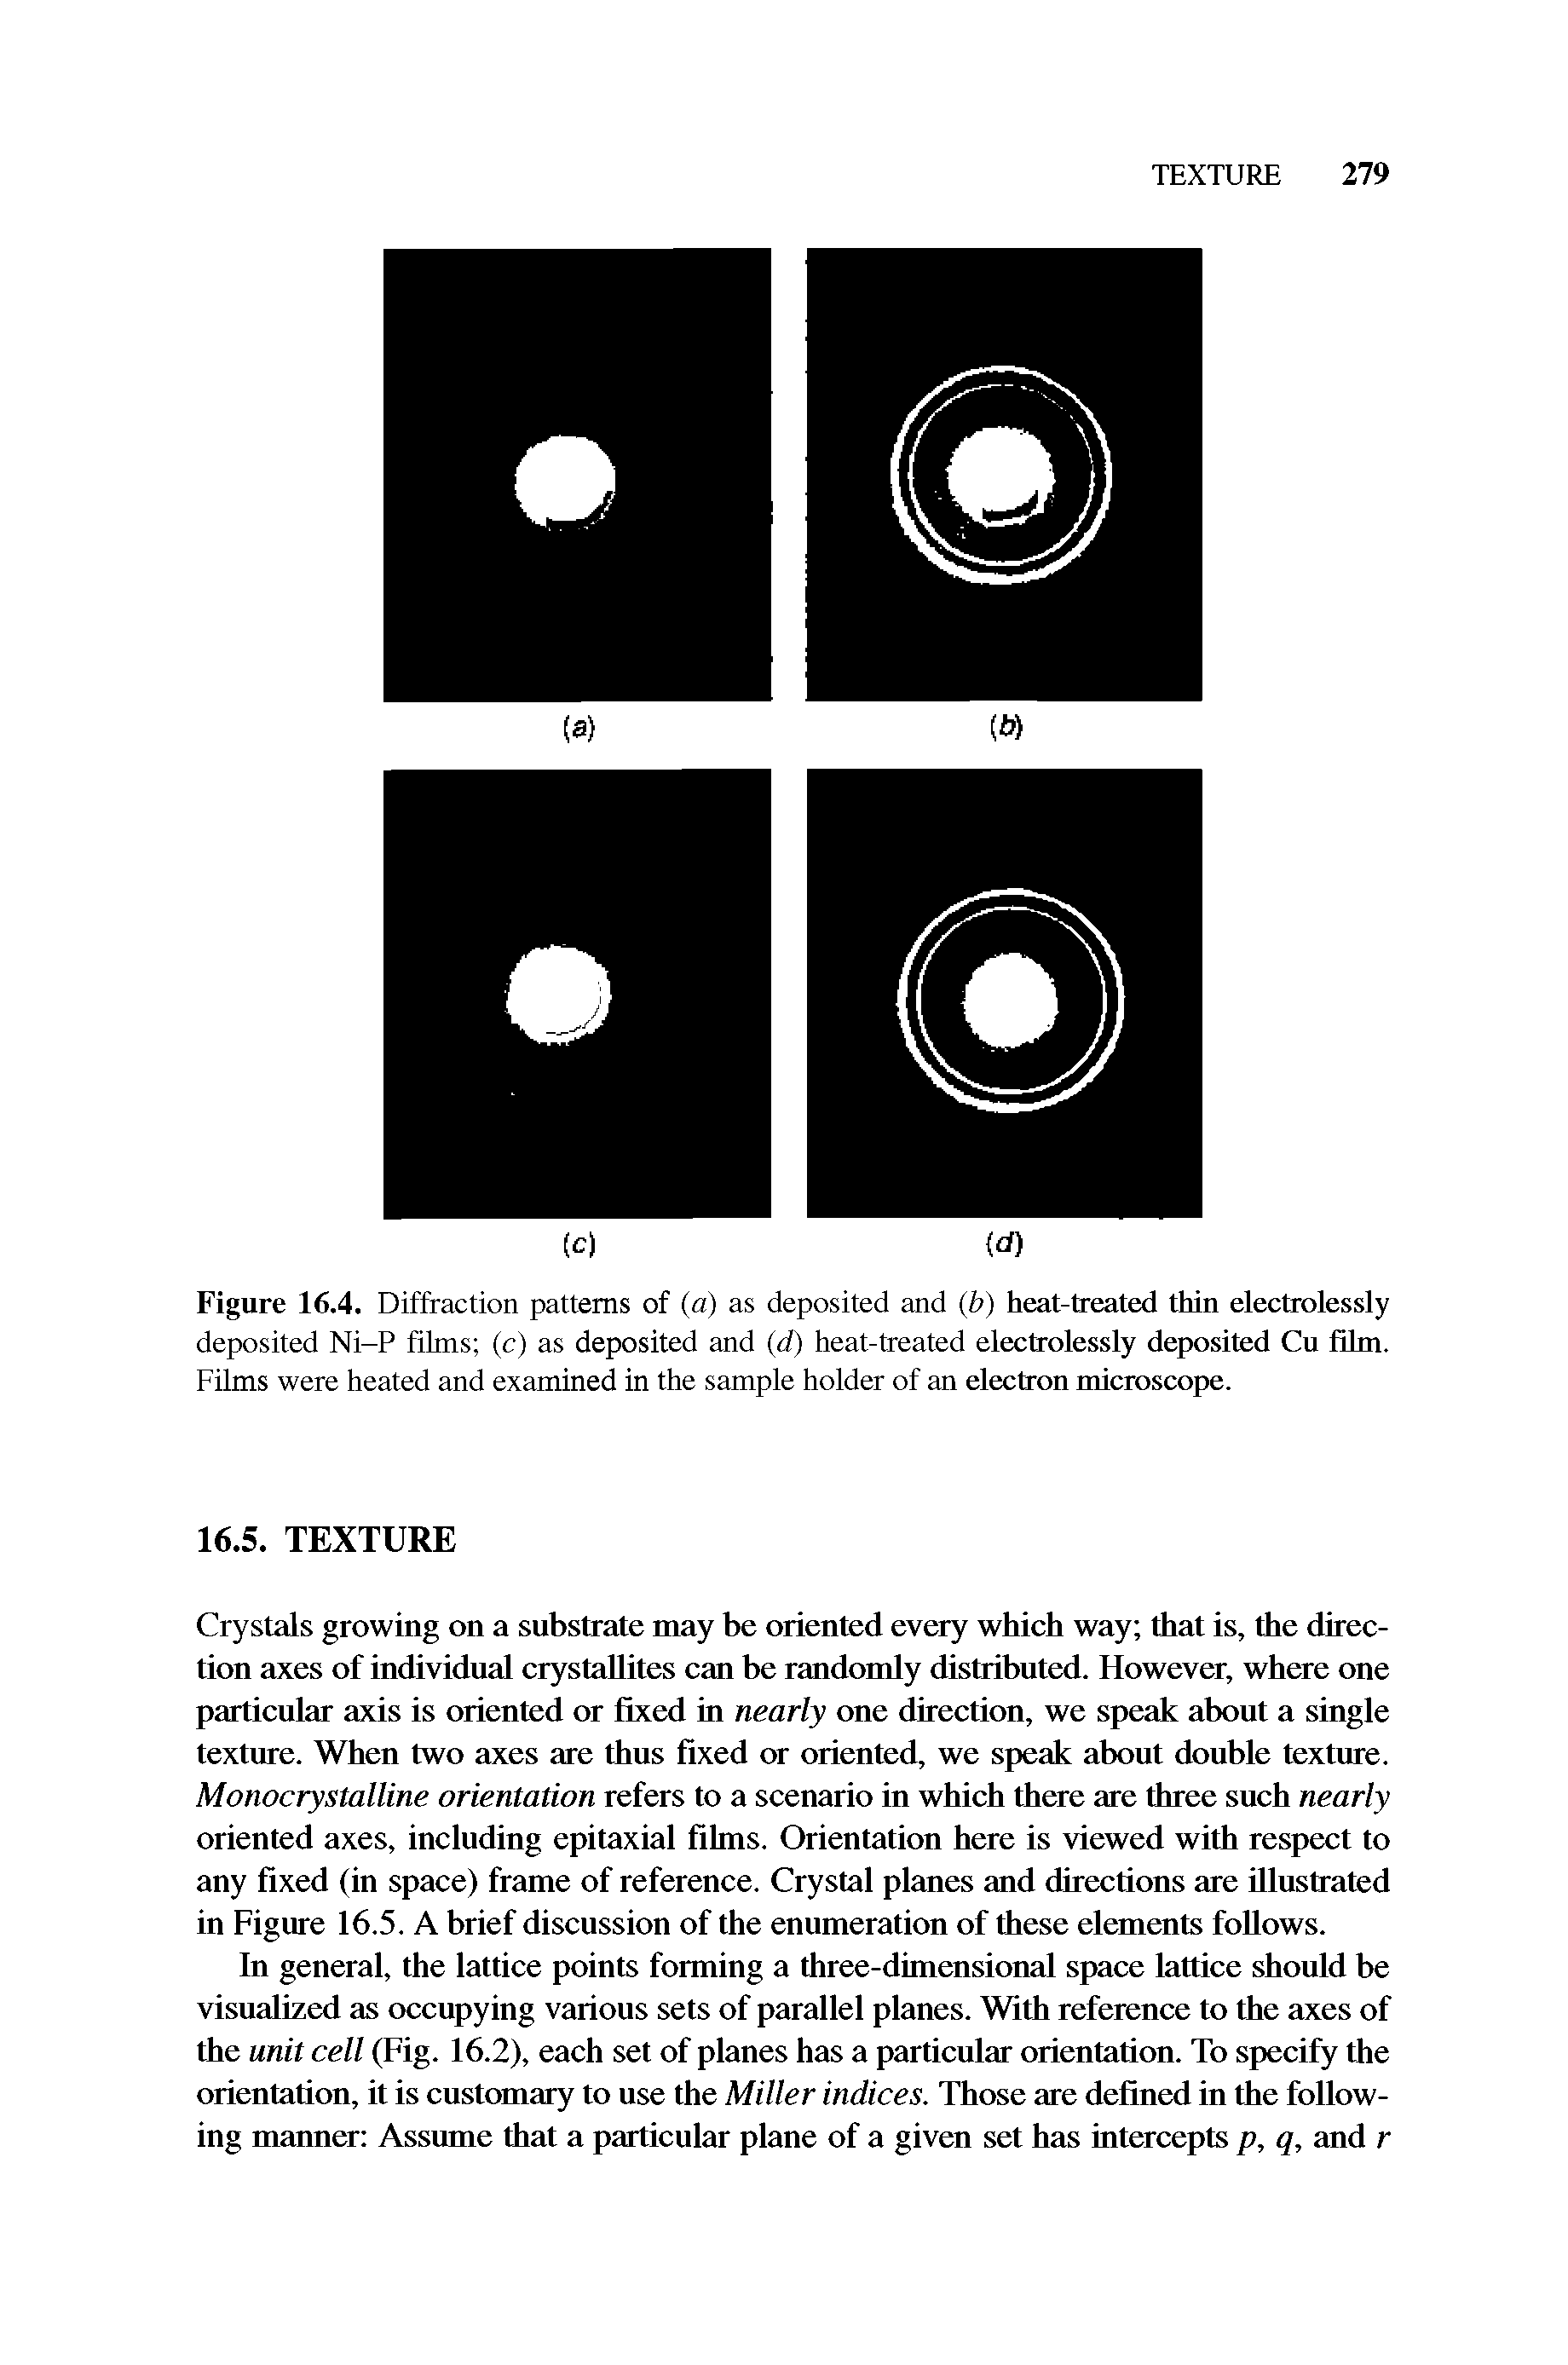 Figure 16.4. Diffraction patterns of (a) as deposited and (b) heat-treated thin electrolessly deposited Ni-P films (c) as deposited and (d) heat-treated electrolessly deposited Cu film. Films were heated and examined in the sample holder of an electron microscope.